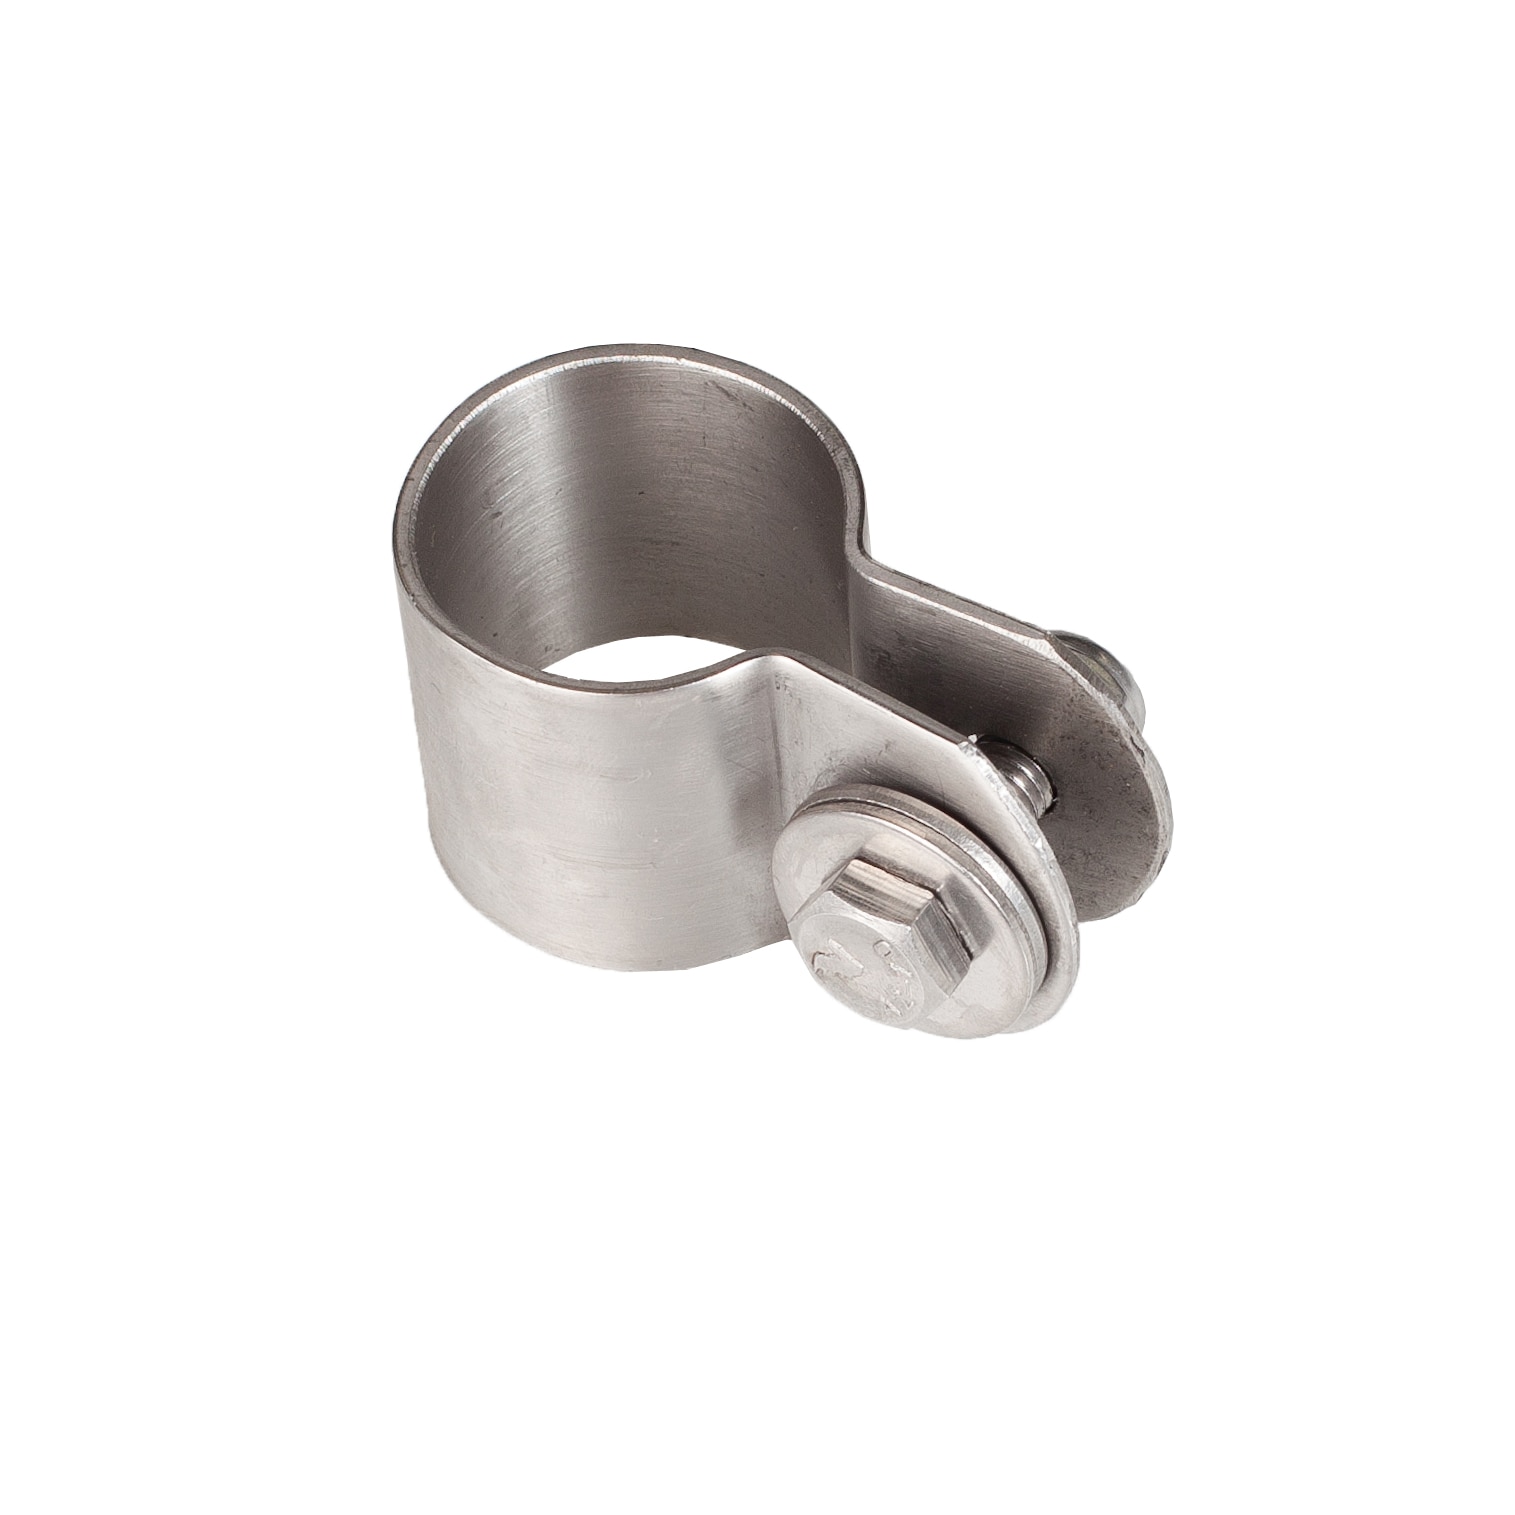 Finntack  Stainless Steel Clamp for D32mm Steel Shafts